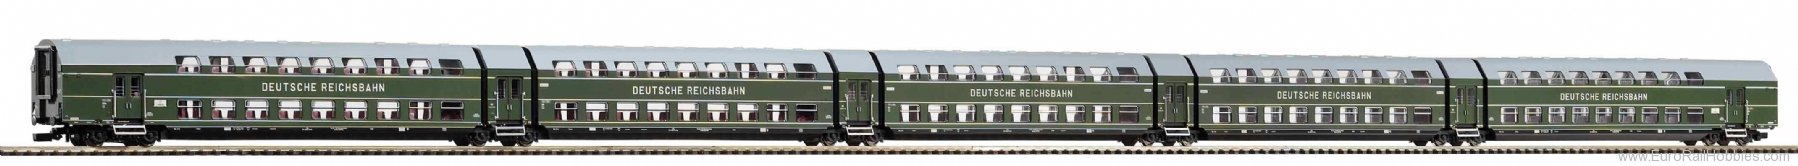 Piko 53124 Double-deck articulated train DGBe12 DR (Piko